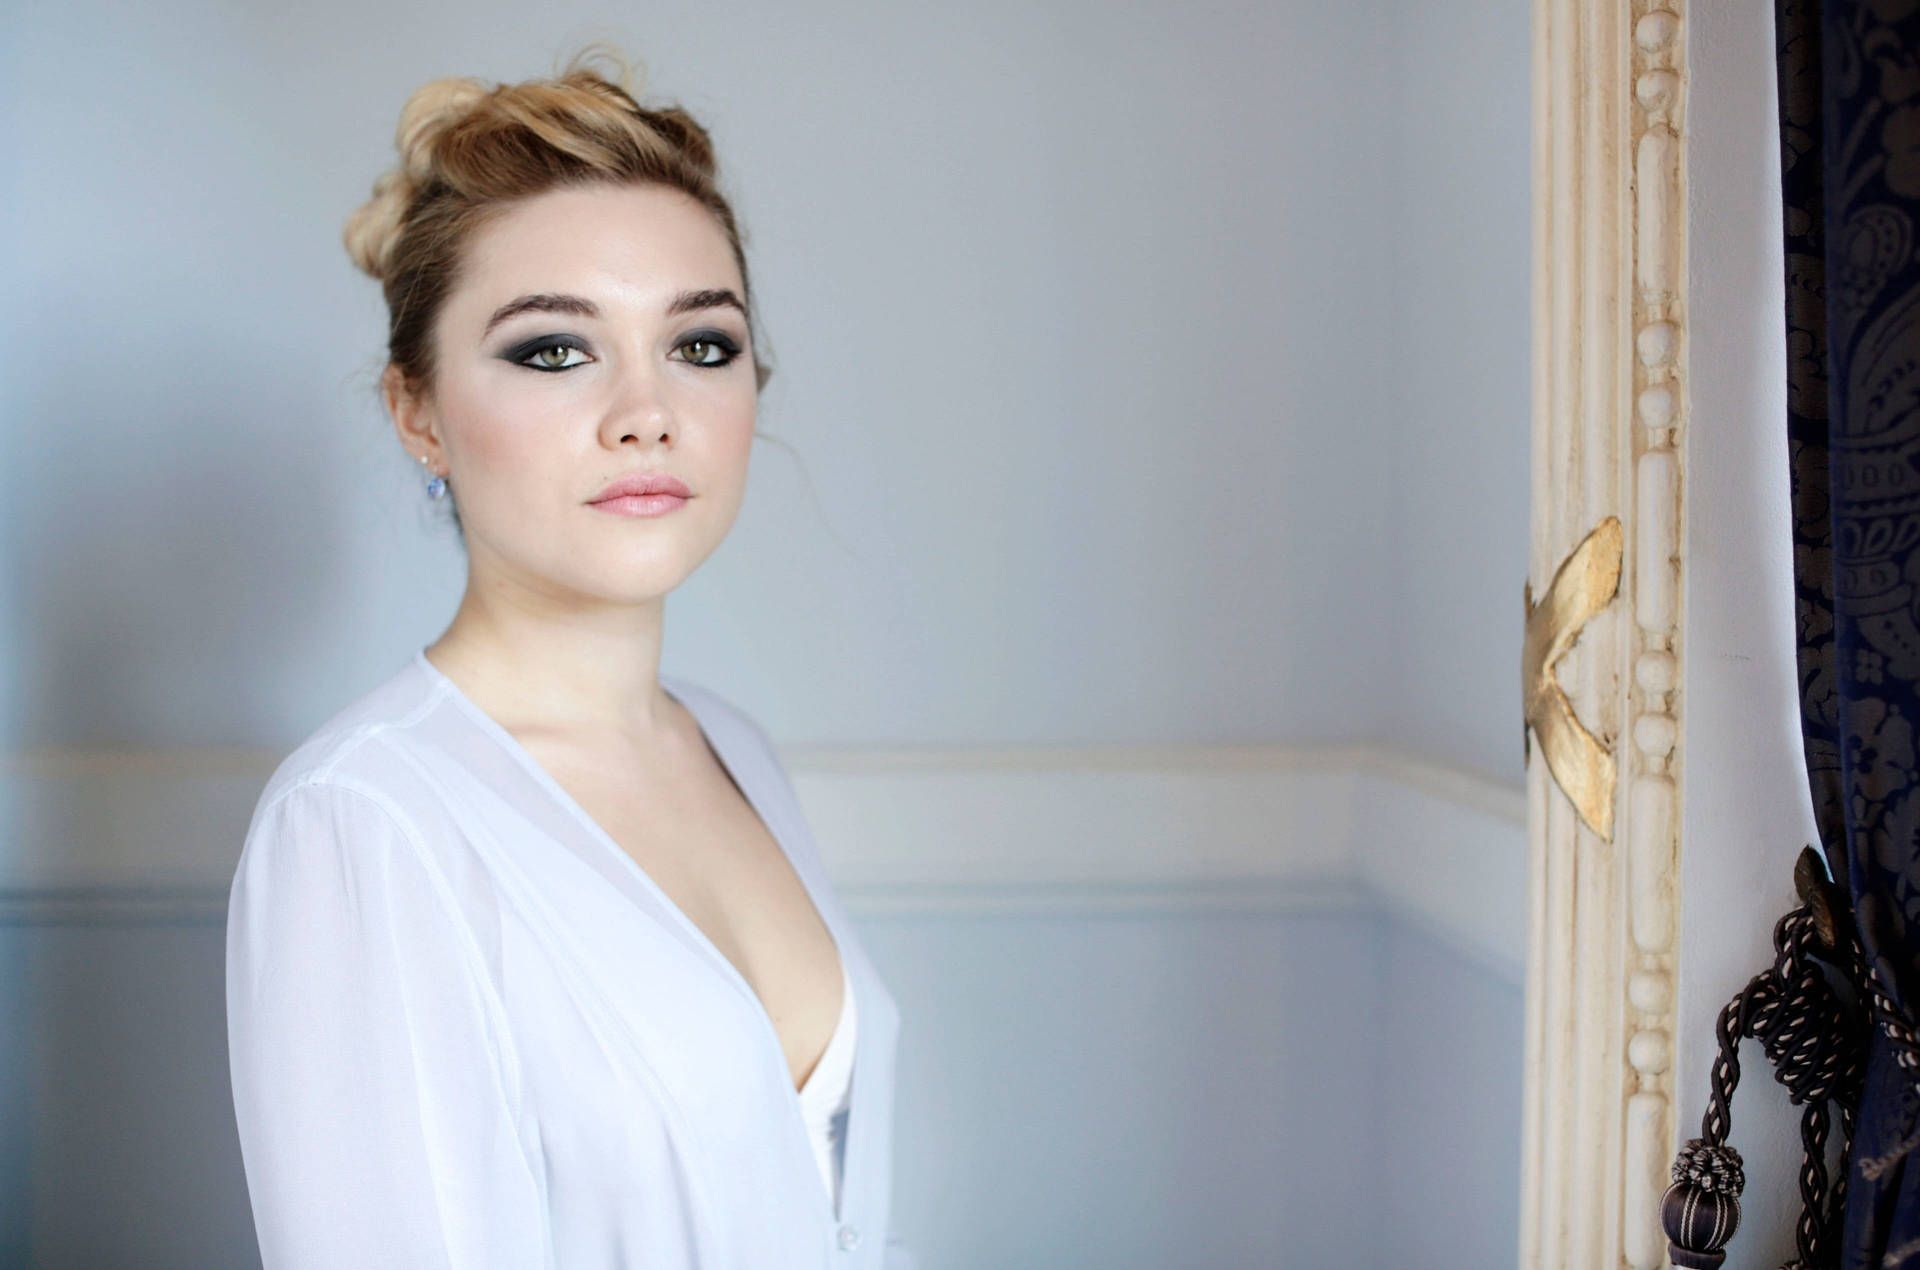 A woman with a white shirt and blonde hair - Florence Pugh